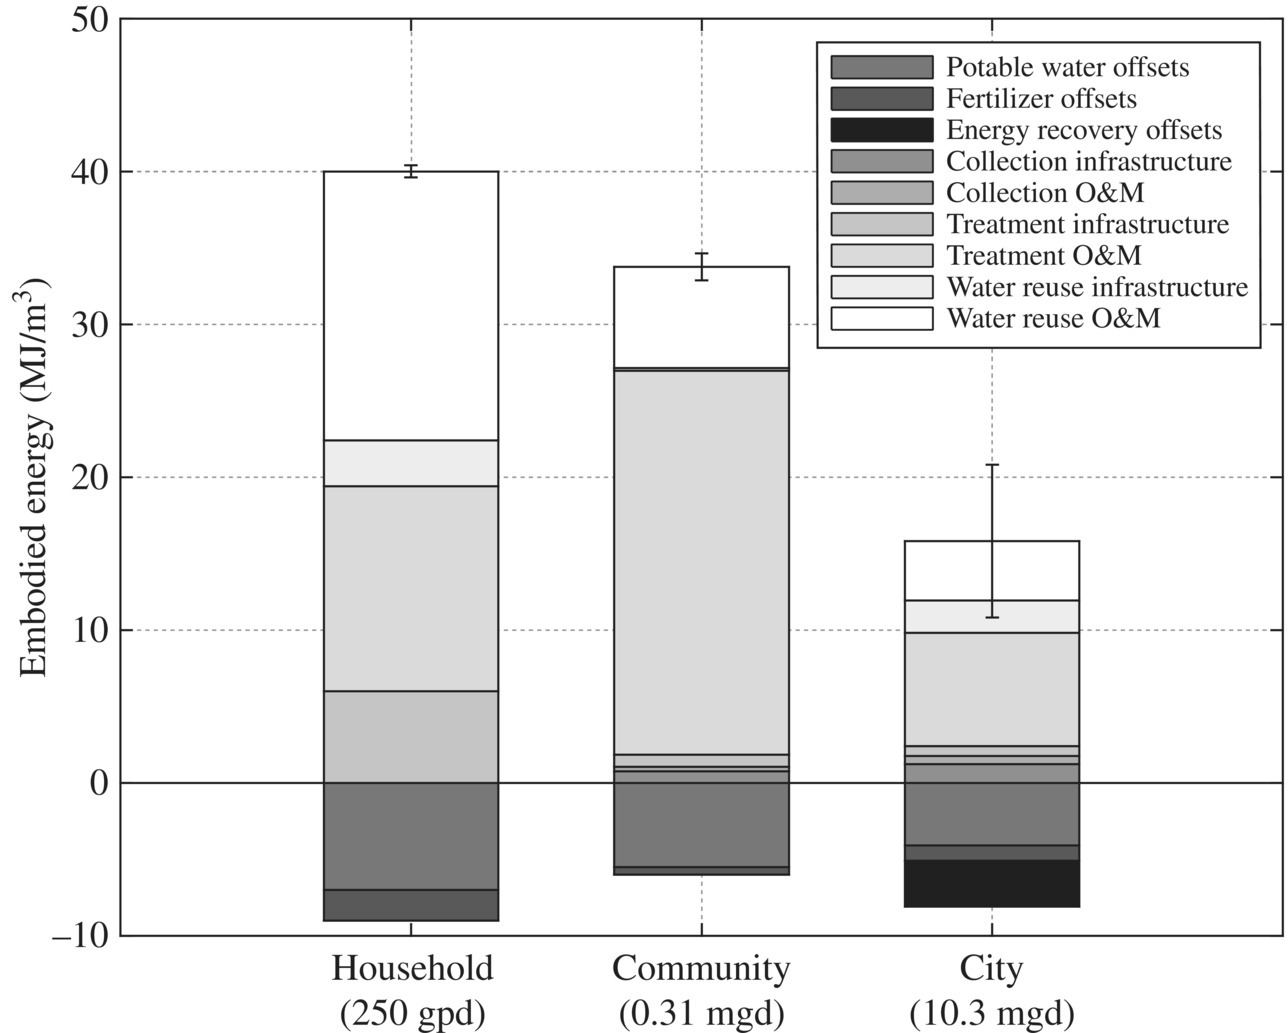 Embodied energy of wastewater systems with 3 stacked bars for household, community, and city, each with error bars. Various shades represent potable water offsets, fertilizer offsets, collection O&M, etc.